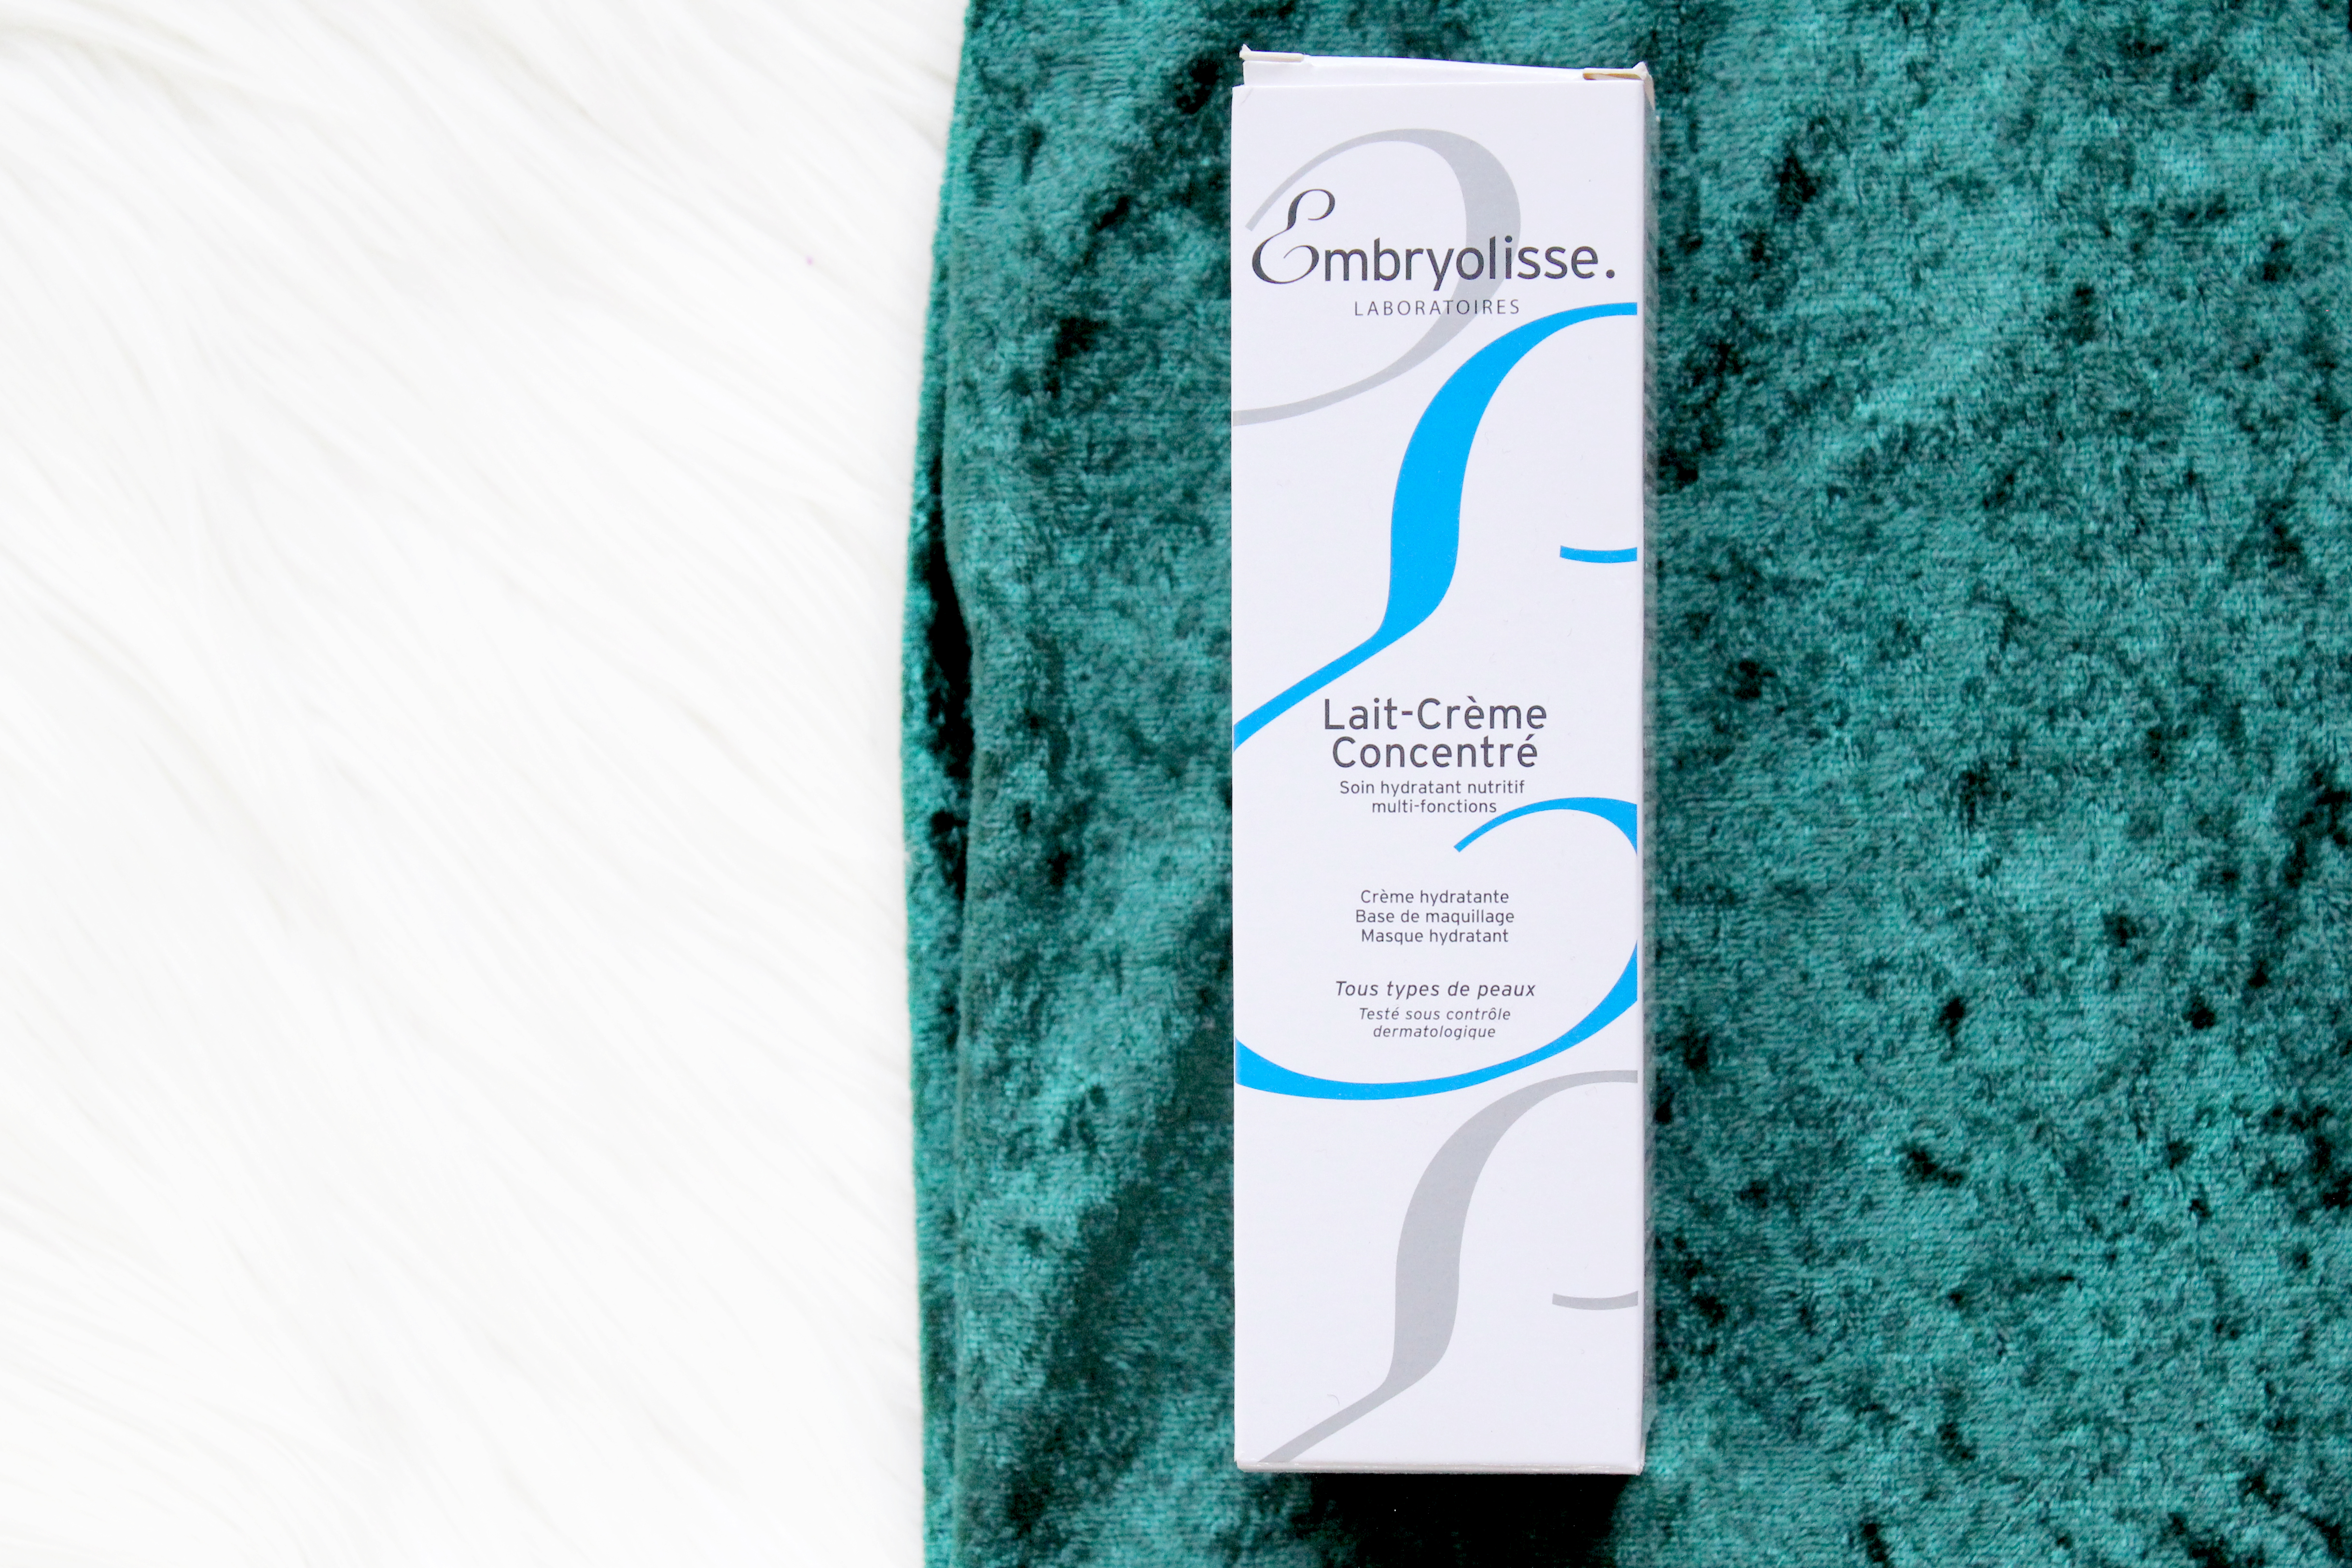 embryolisse creme review